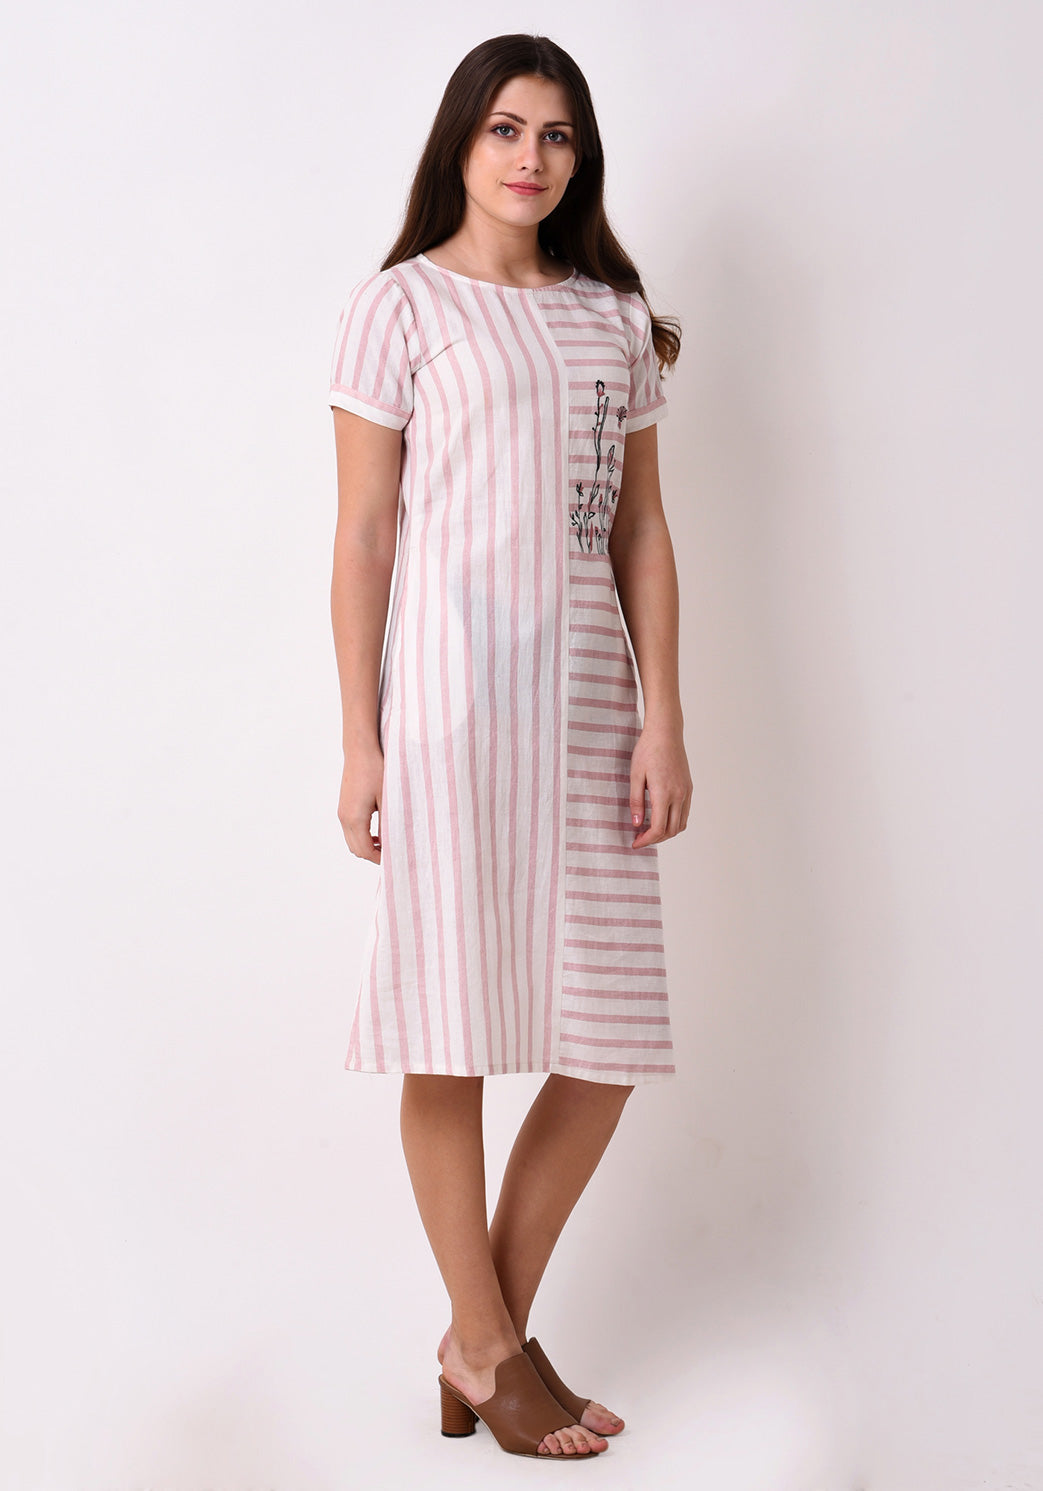 Striped Embroidered Dress - Blush Pink